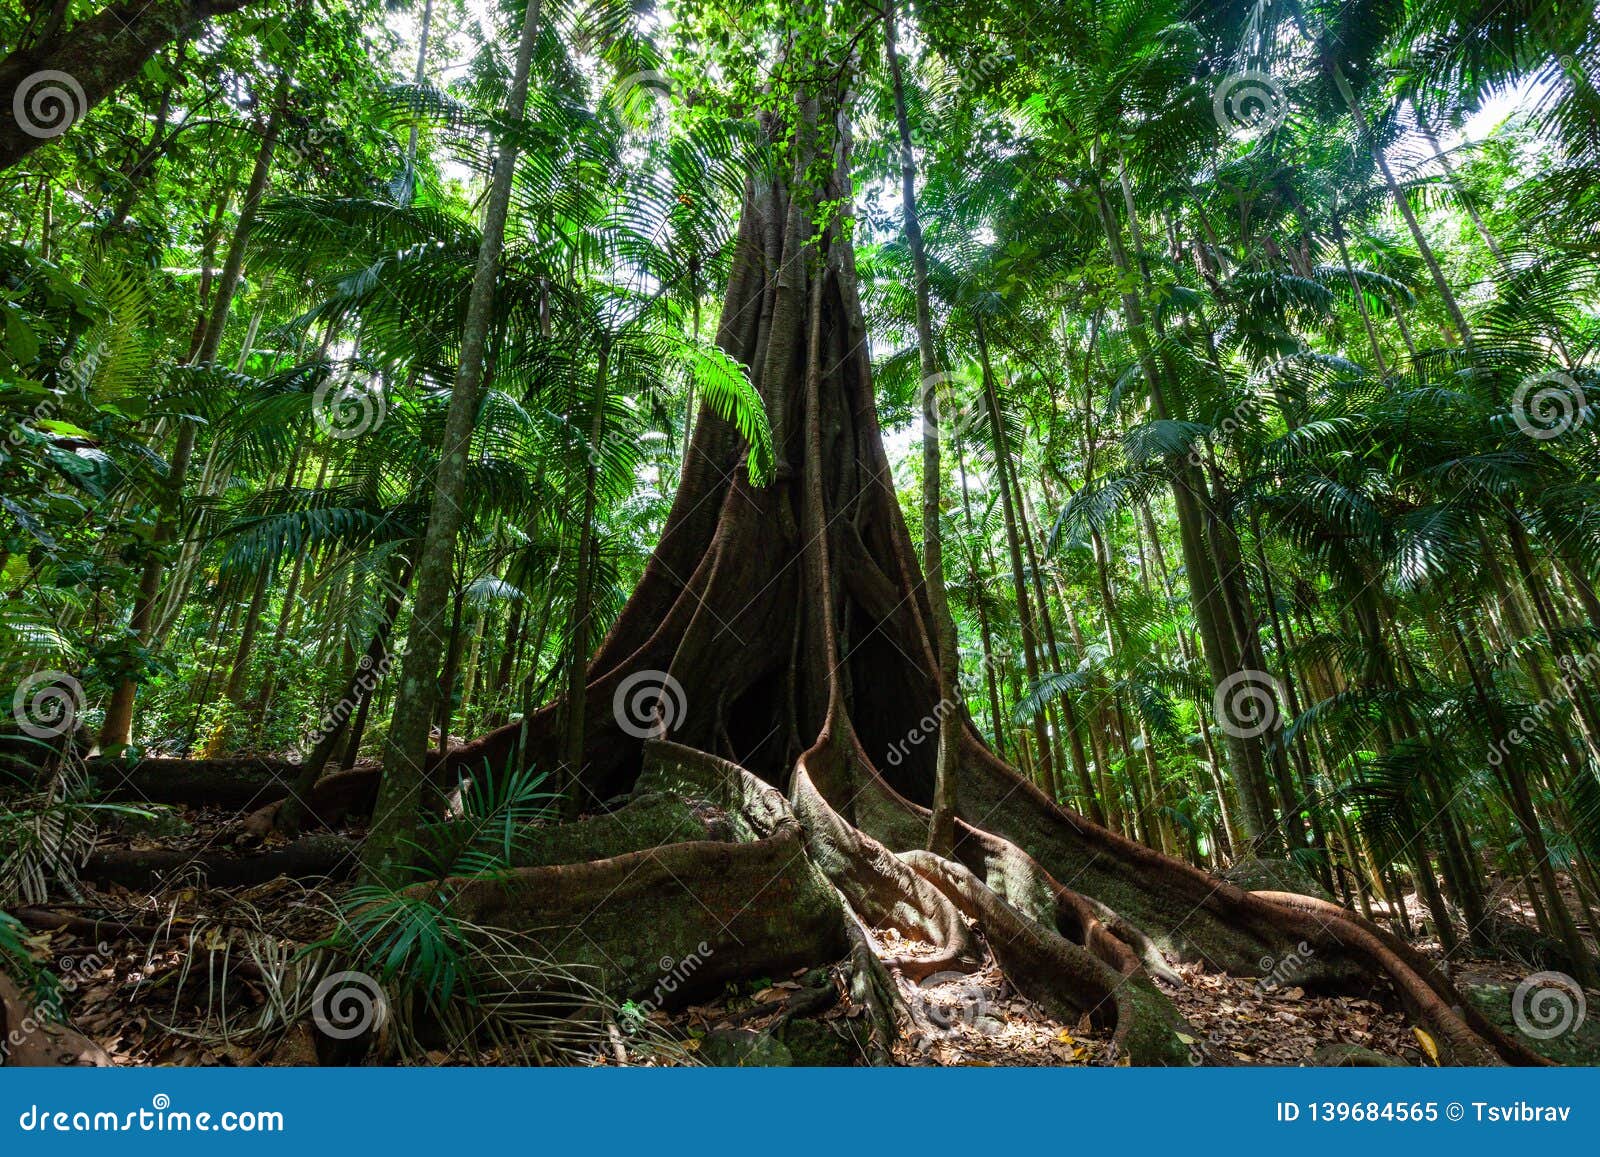 giant fig tree roots in a rainforest.